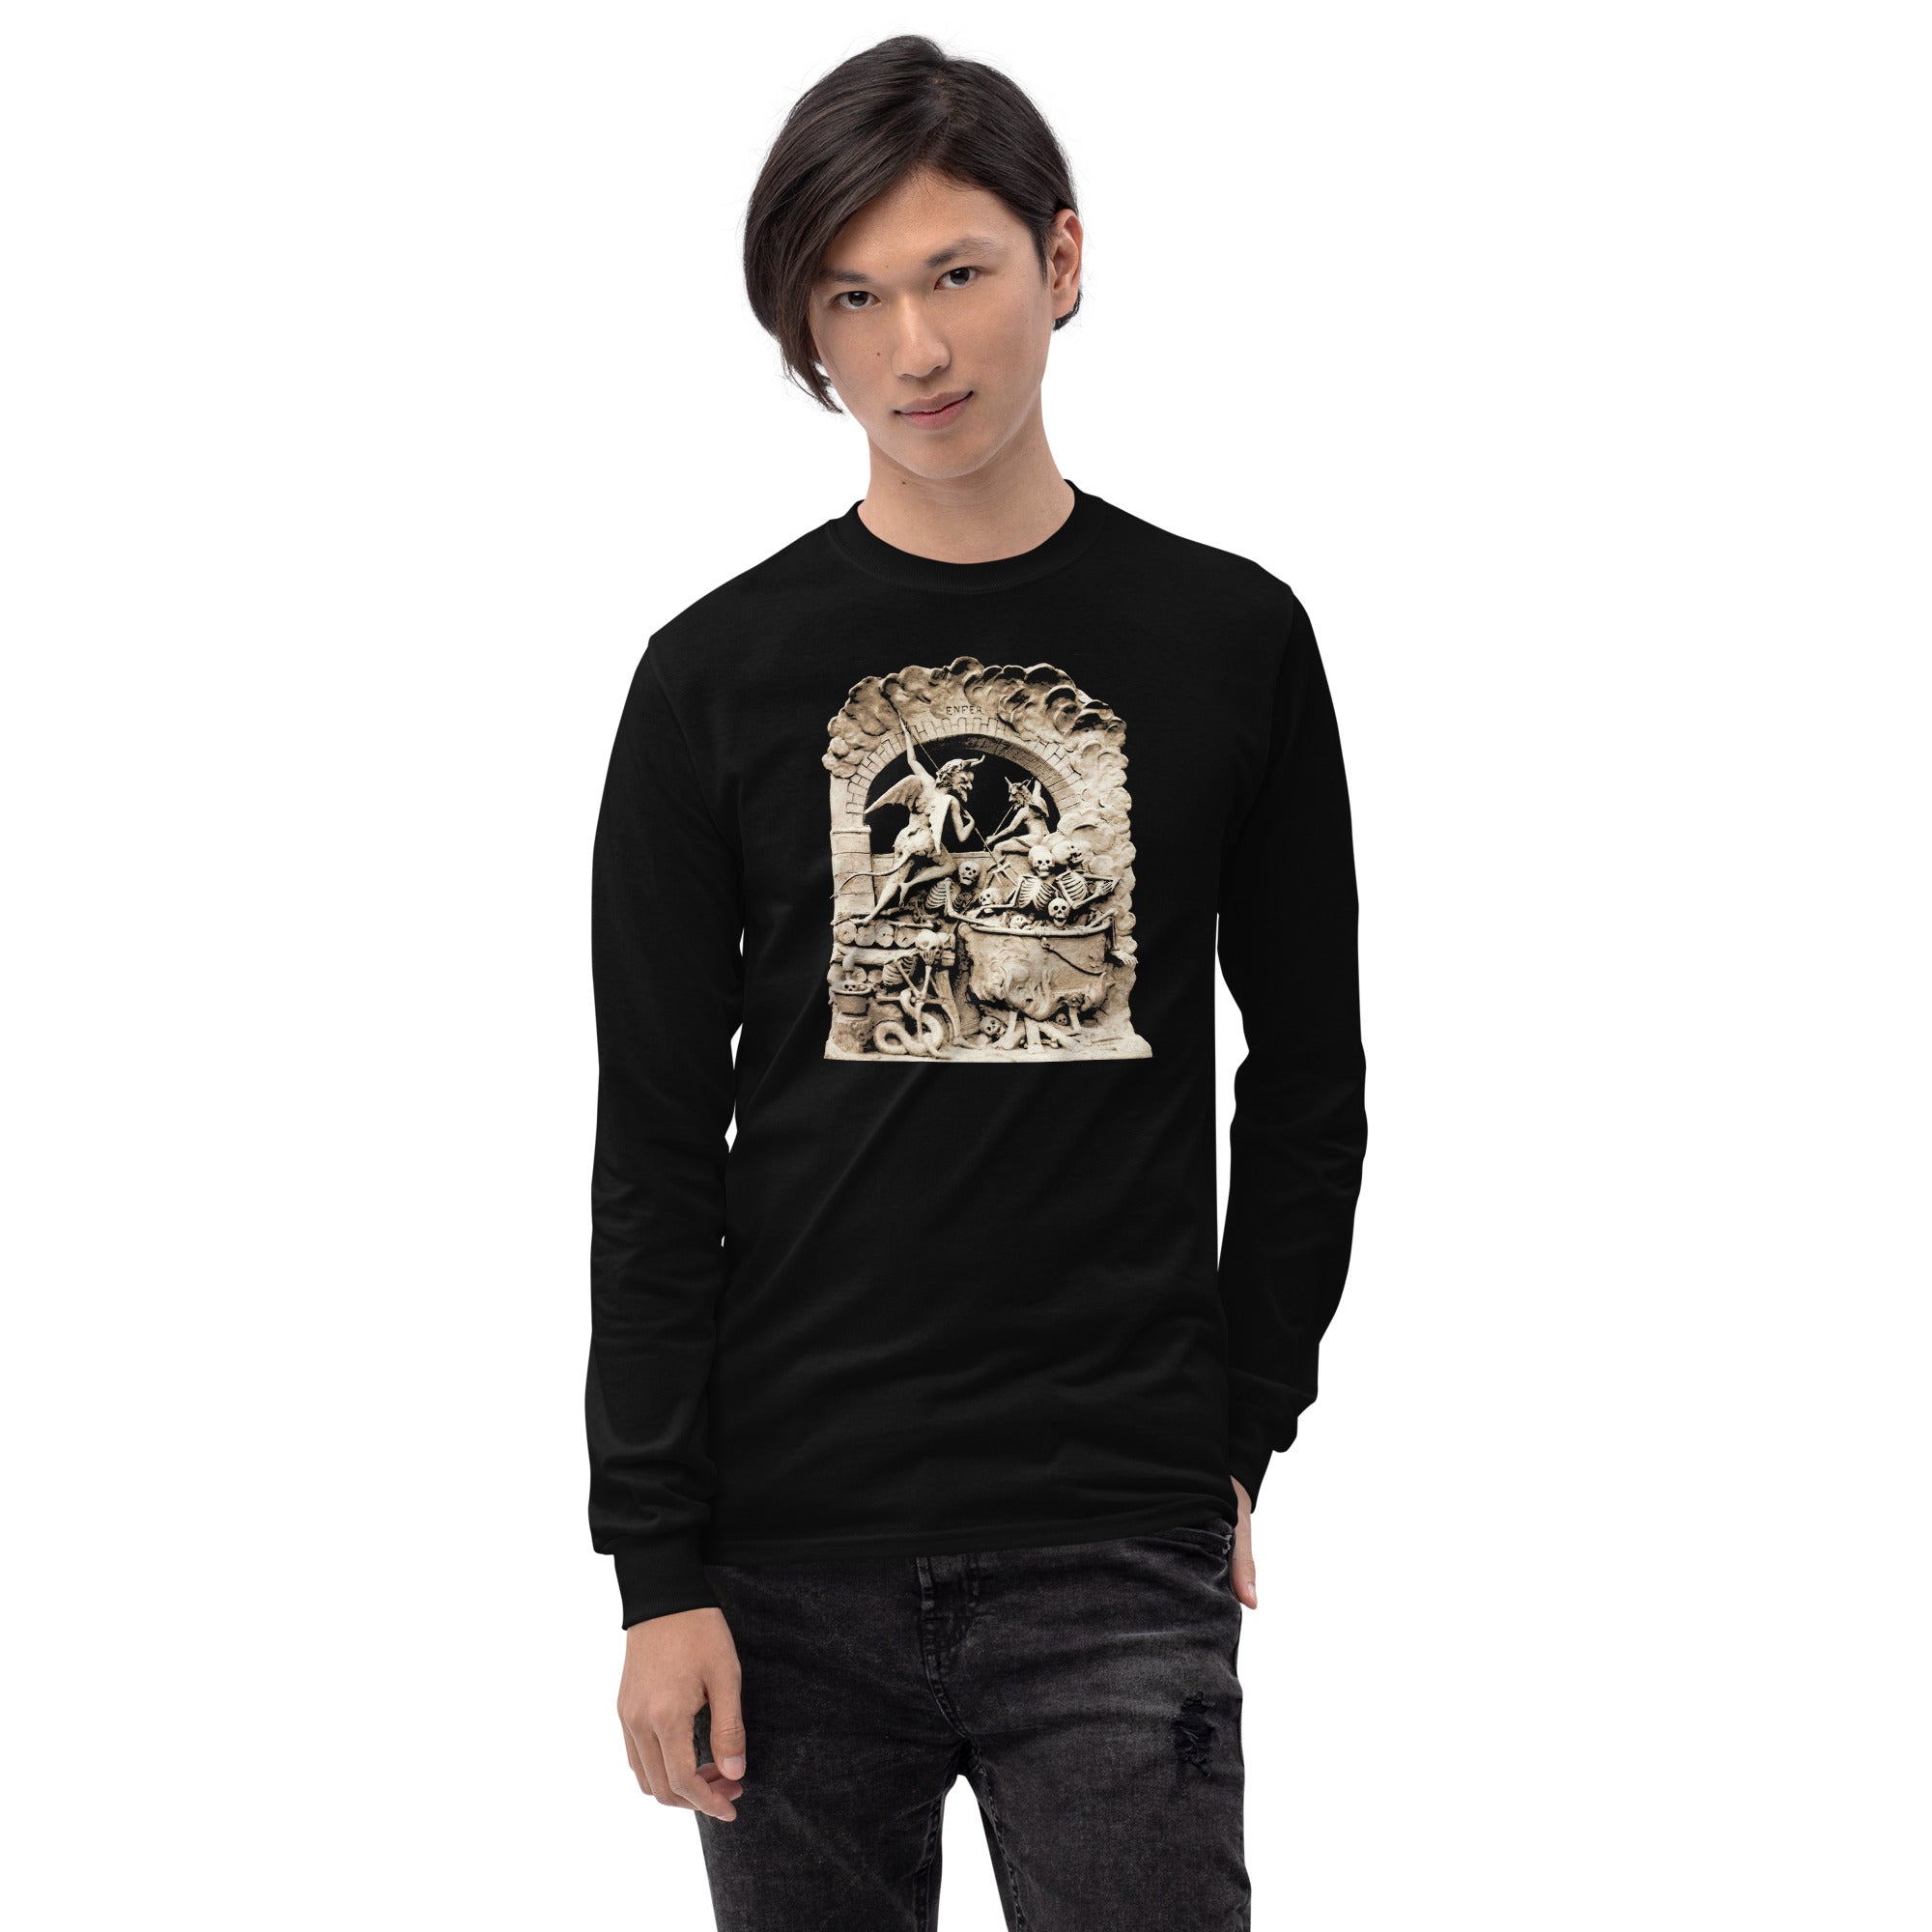 Les Diableries The Pits of Hell and the Devil Long Sleeve Shirt - Edge of Life Designs